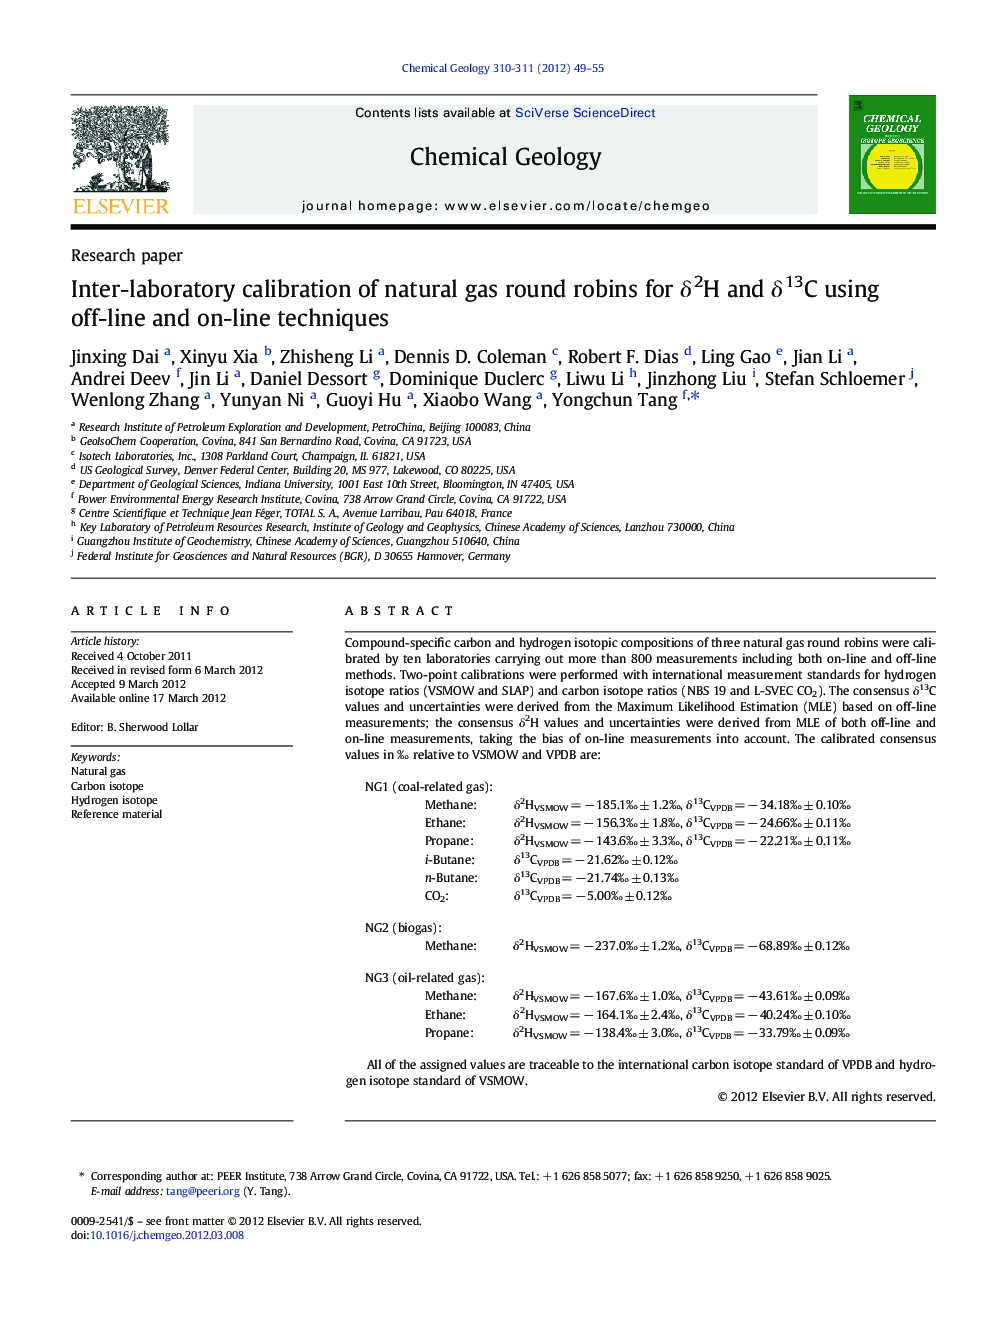 Inter-laboratory calibration of natural gas round robins for δ2H and δ13C using off-line and on-line techniques